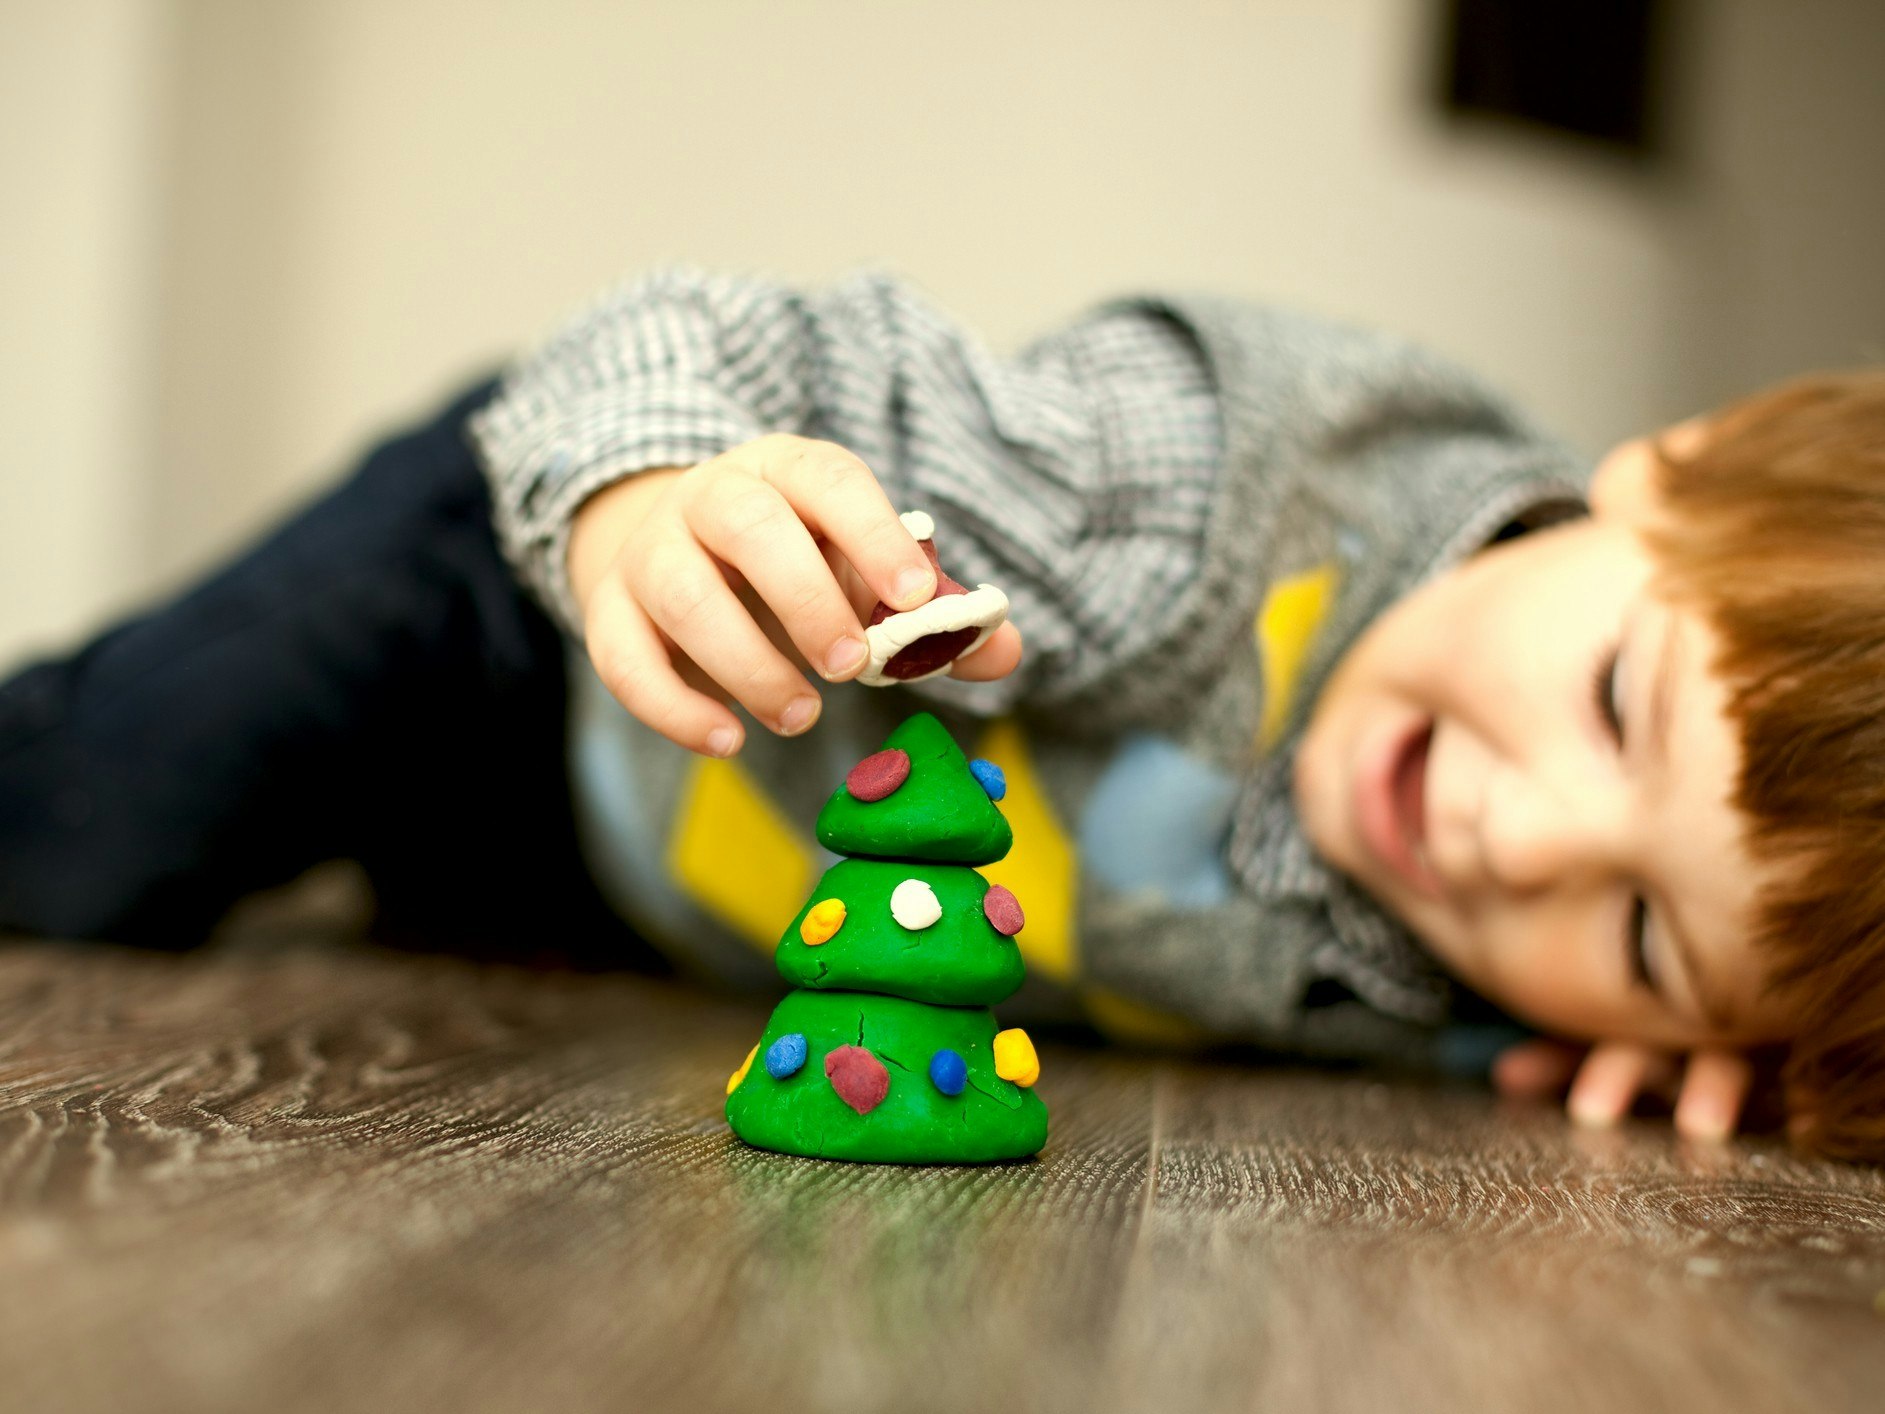 <p>Sensory activities can benefit children with developmental disorders or disabilities such as autism in several ways. [Source: iStock]</p>
